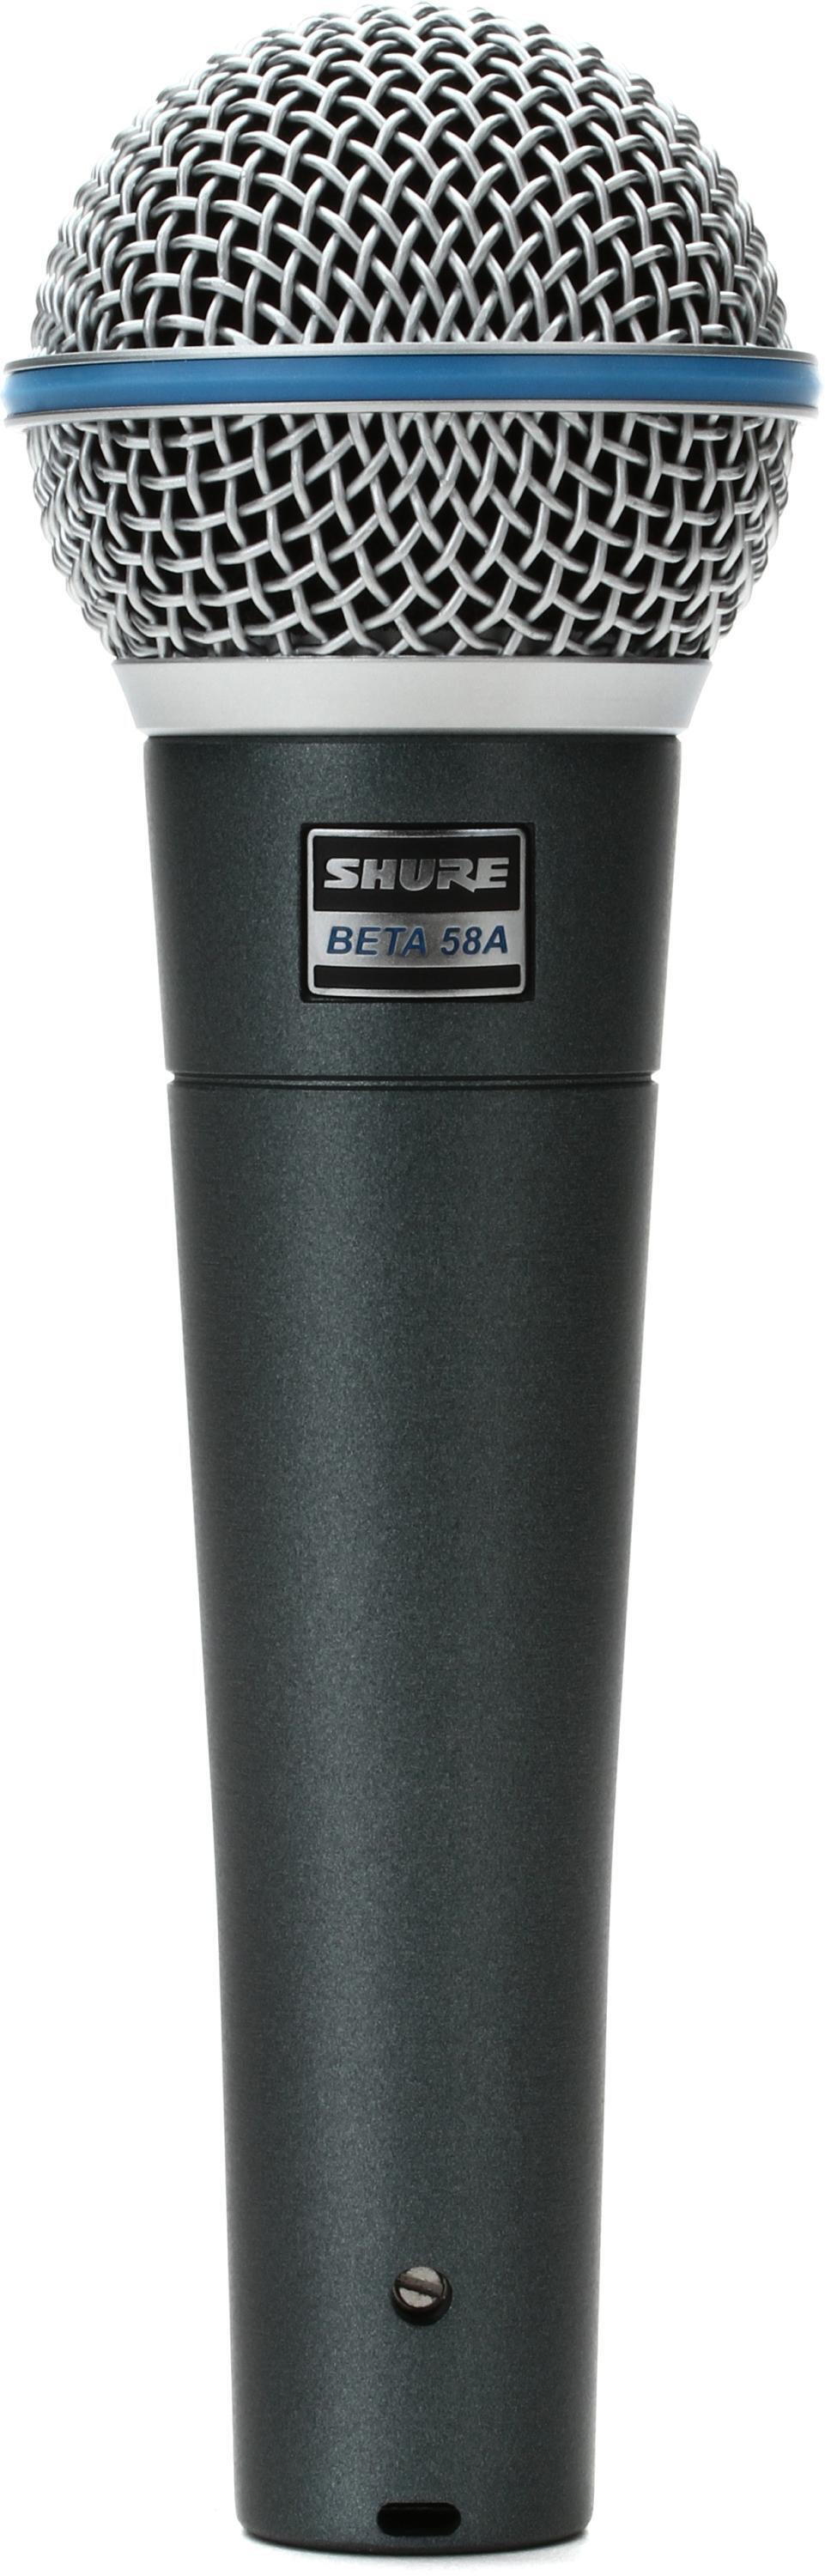 Bundled Item: Shure Beta 58A Supercardioid Dynamic Vocal Microphone